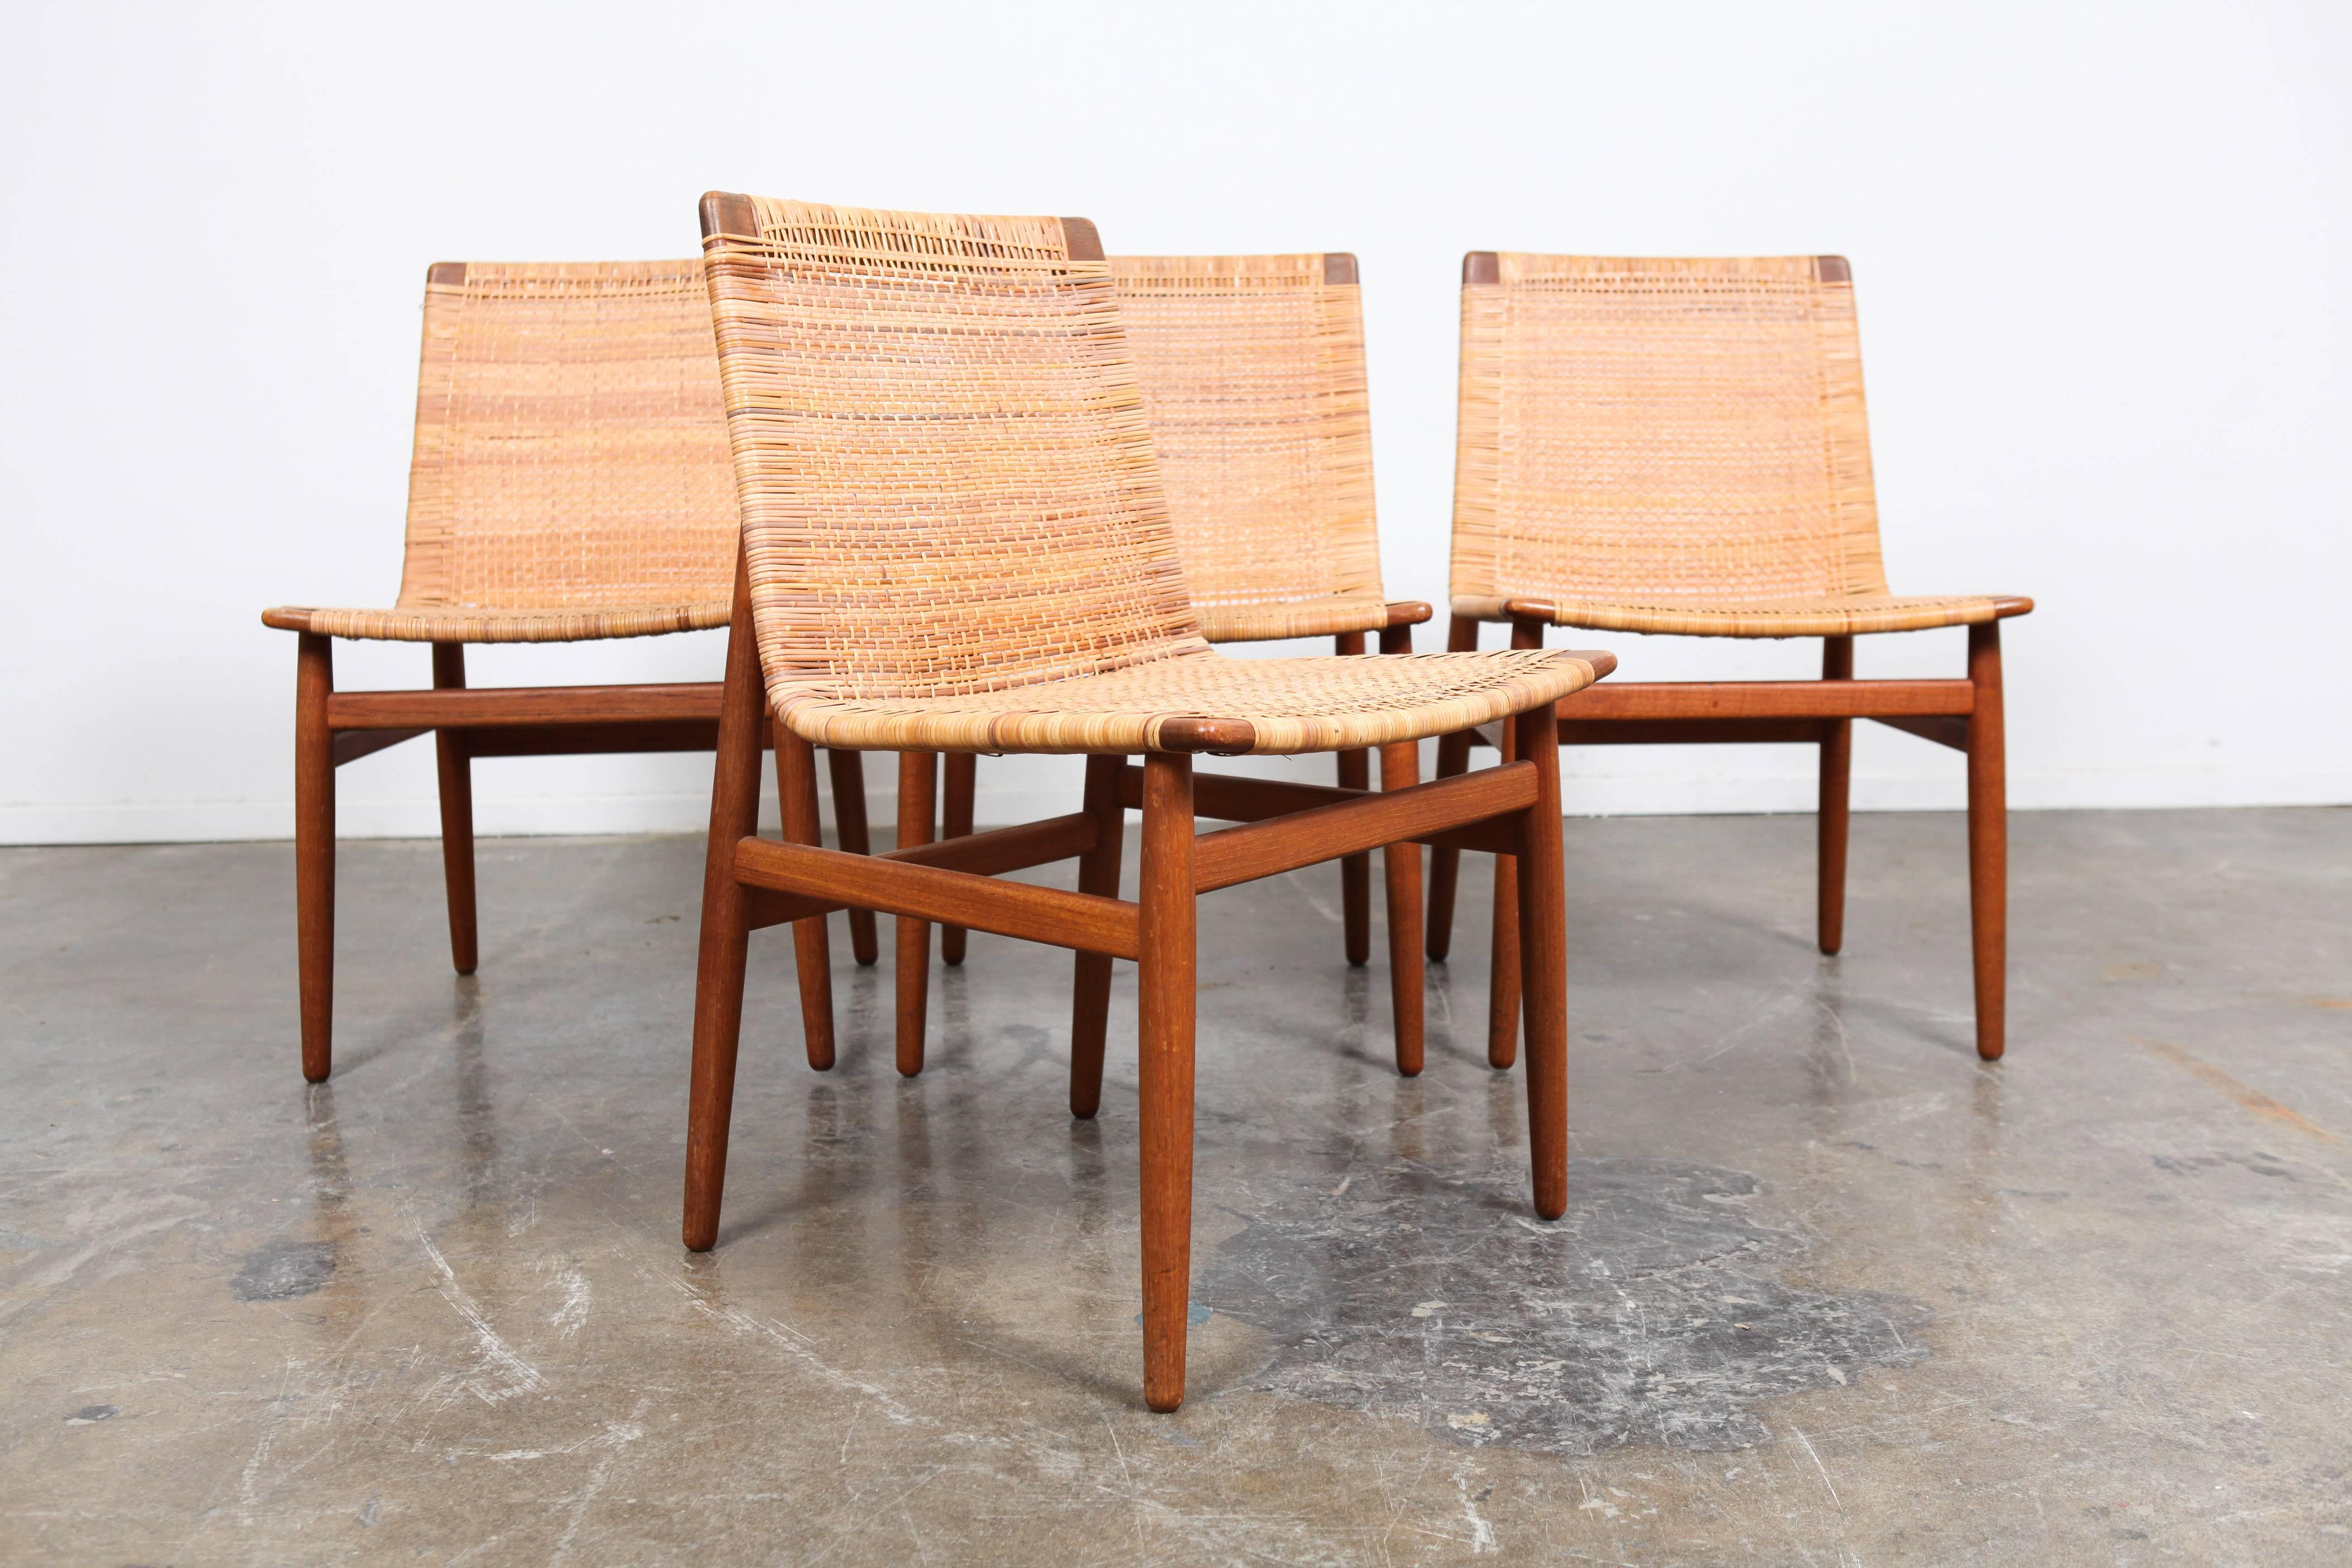 Set of four extremely rare Danish floating-seat dining chairs with original caning and teak frame designed by Jorgen Høj.